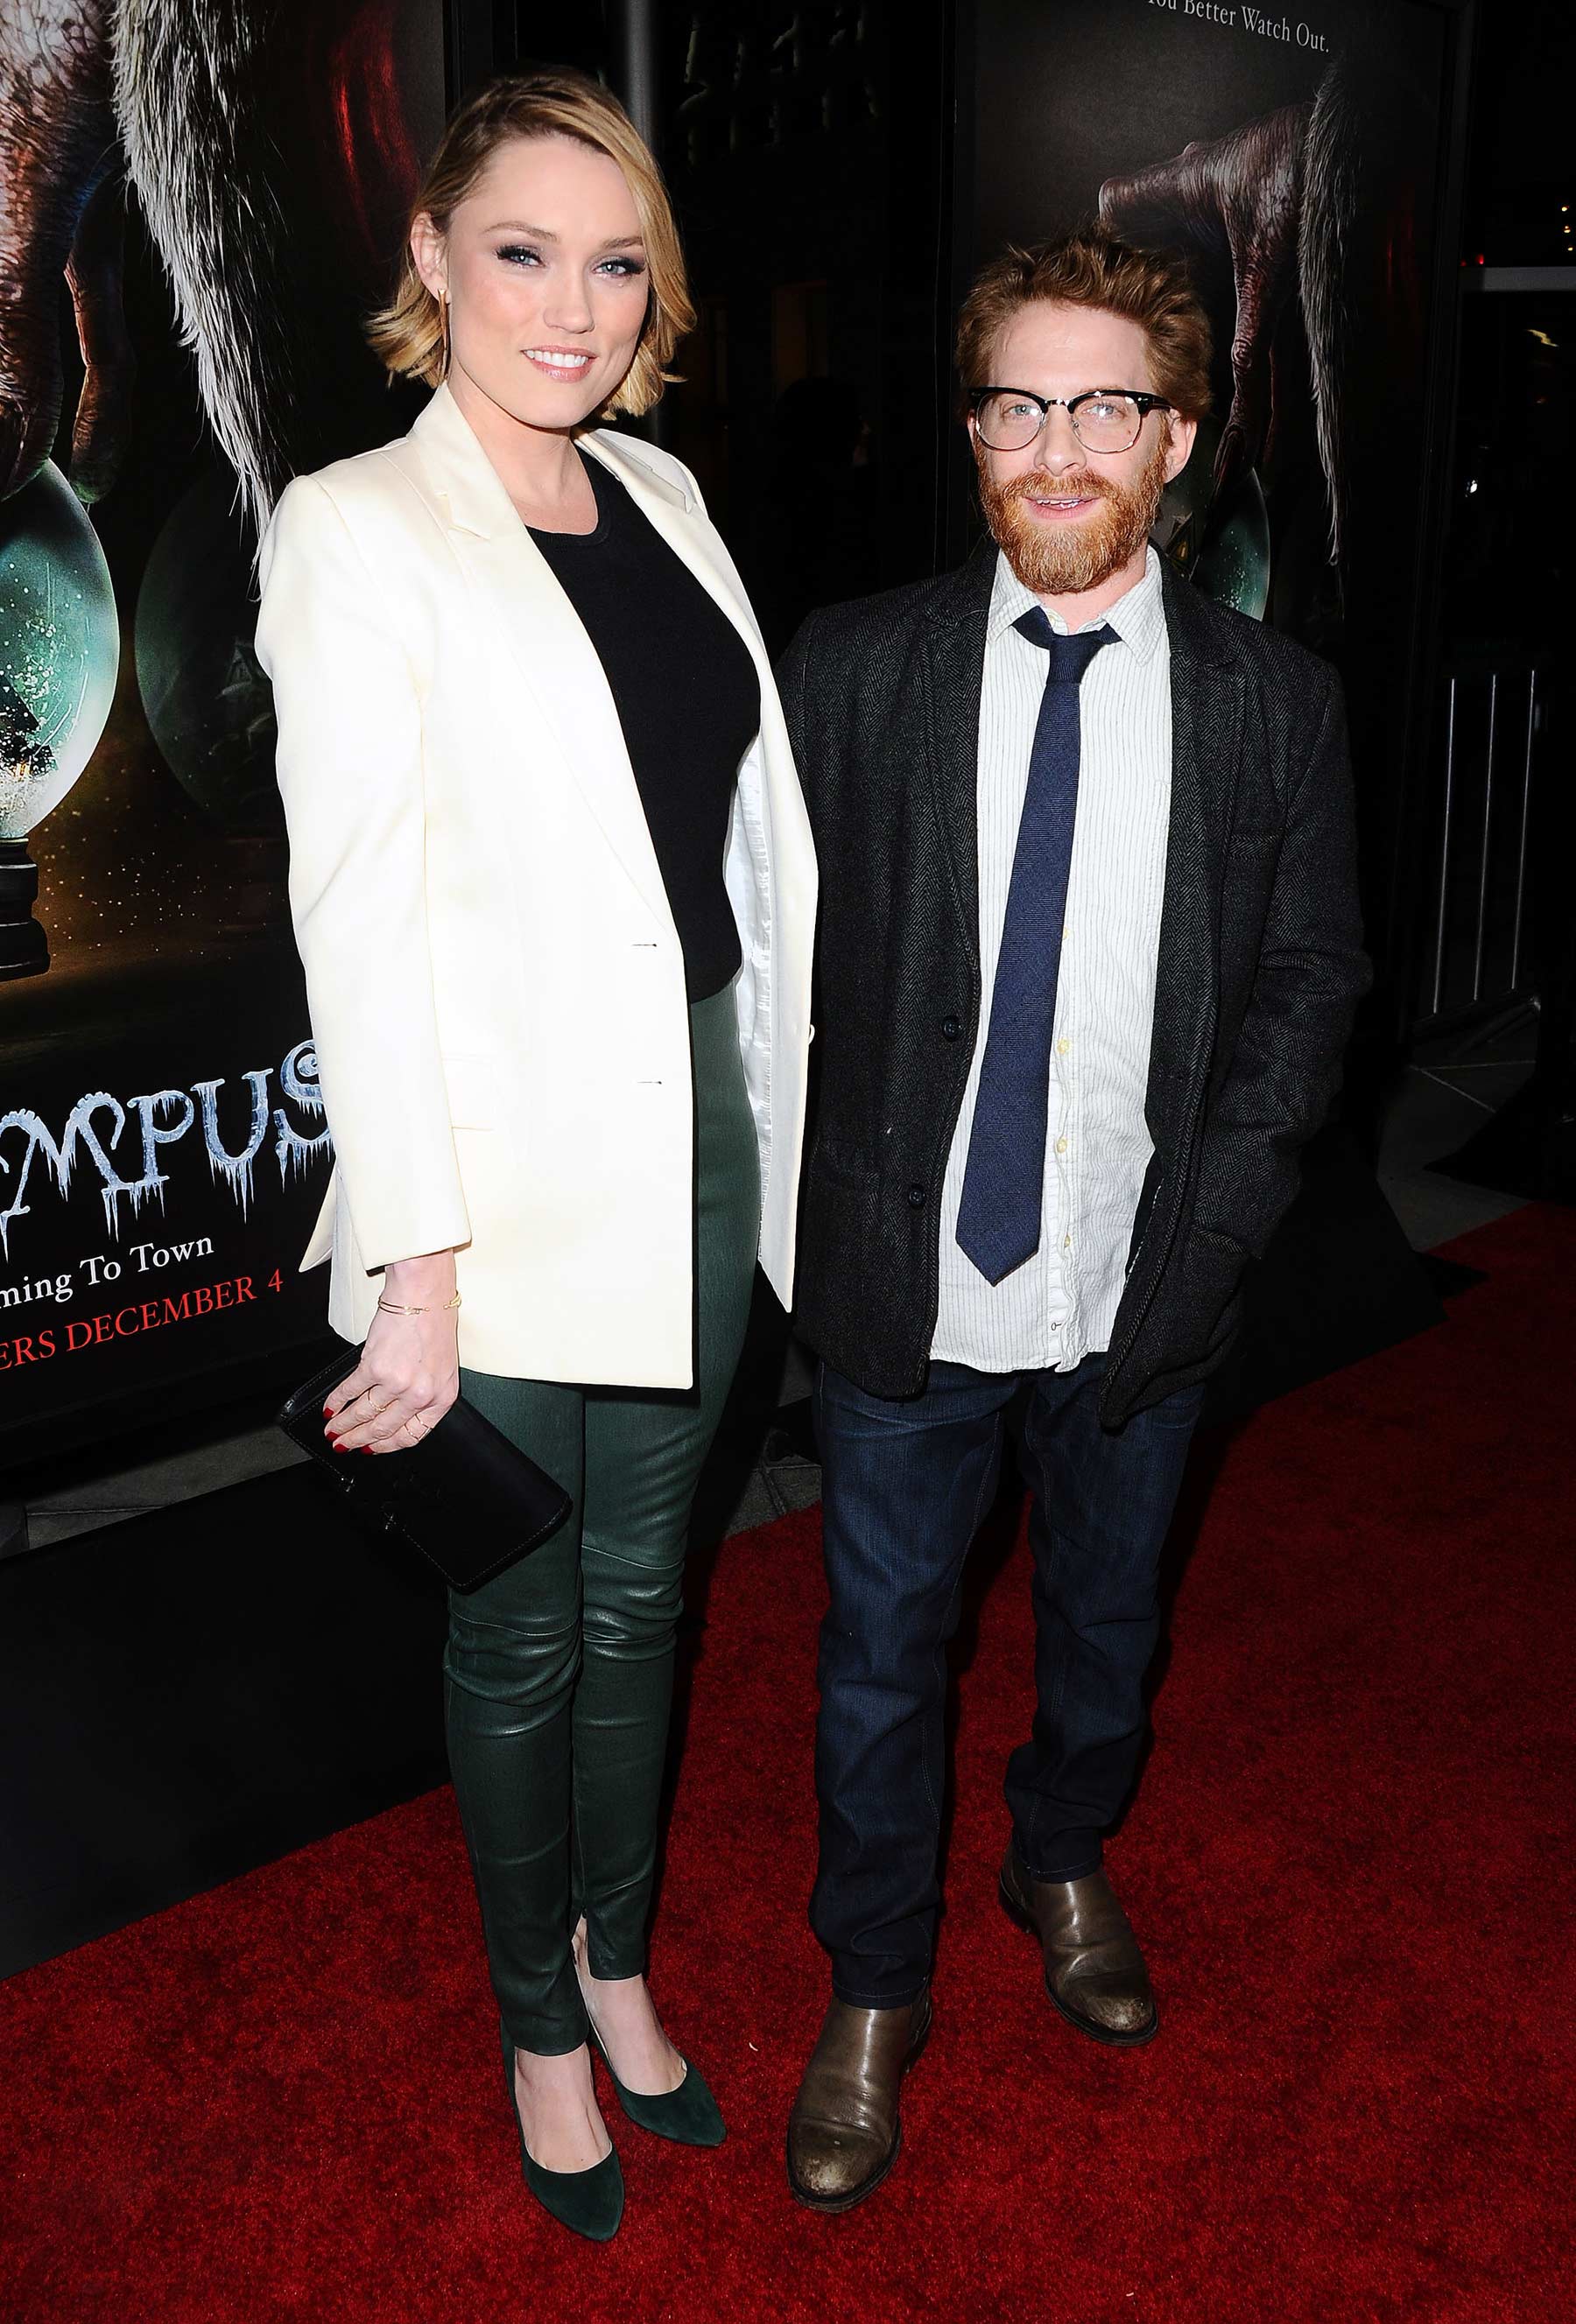 Clare Grant attends Screening of Universal Pictures Krampus